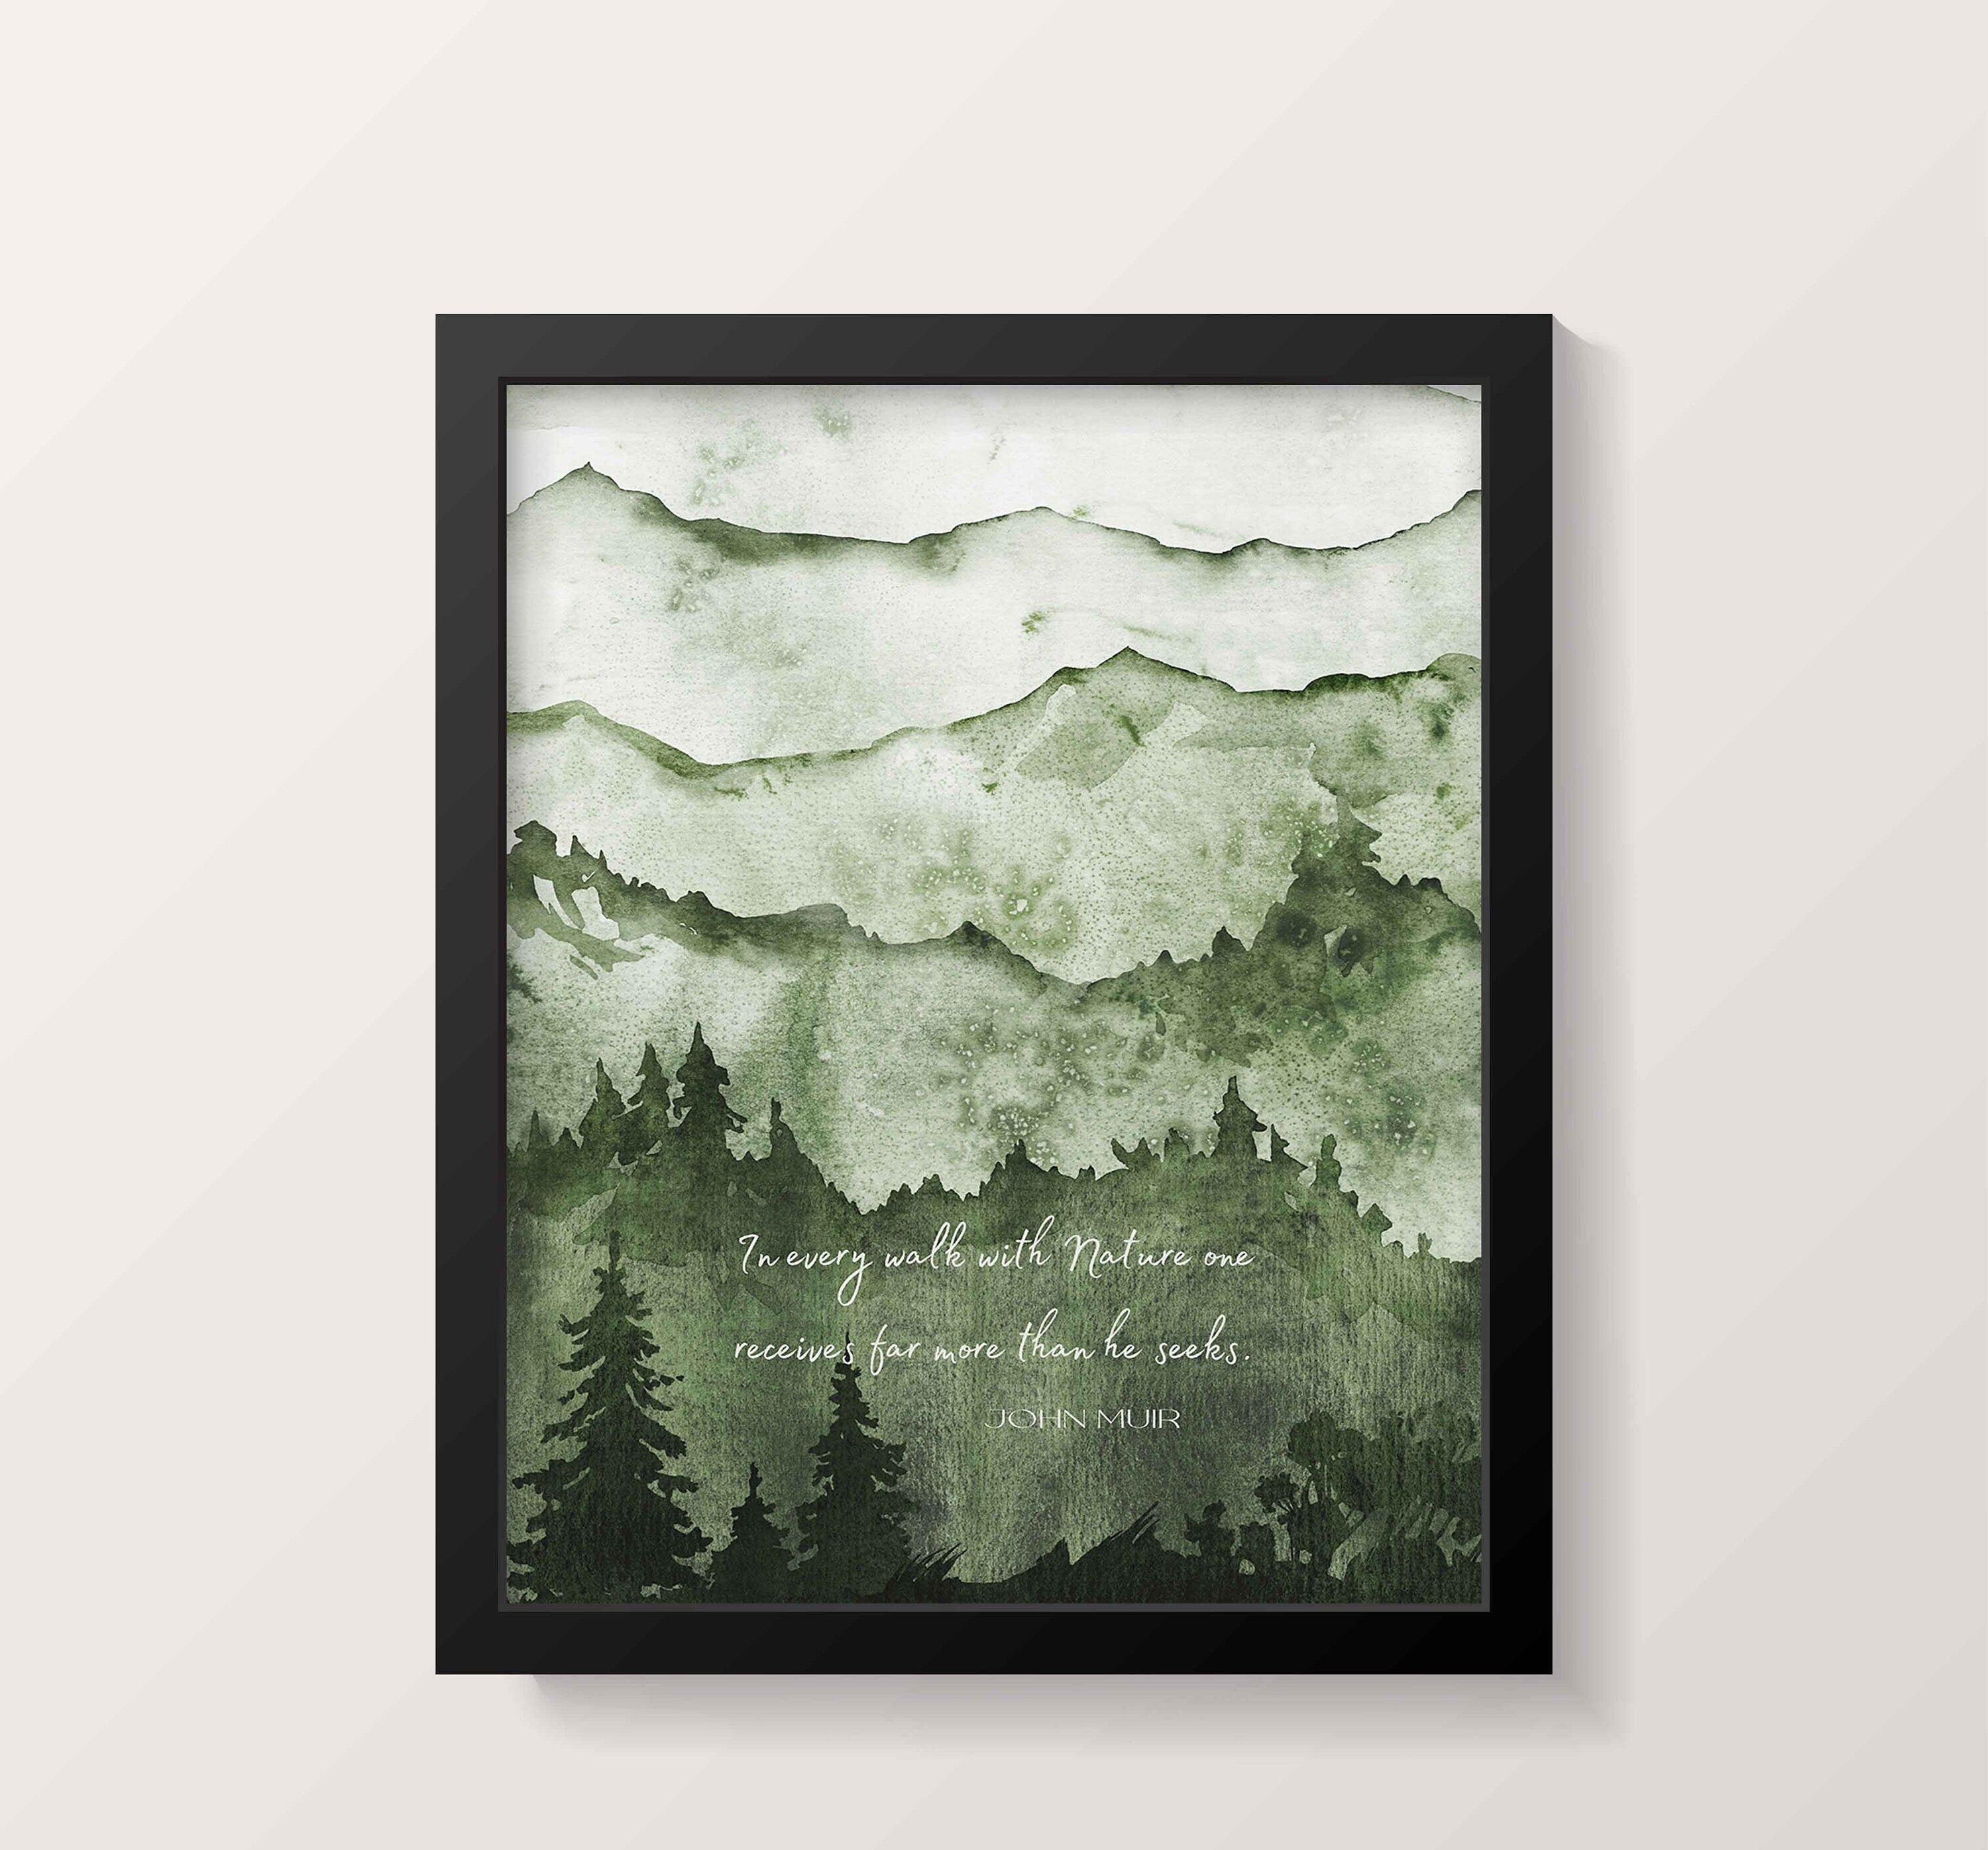 FRAMED John Muir Print for Country Decor, In Every Walk With Nature Quote Wall Art Prints FRAMED SIZES 8x10 through 24x36